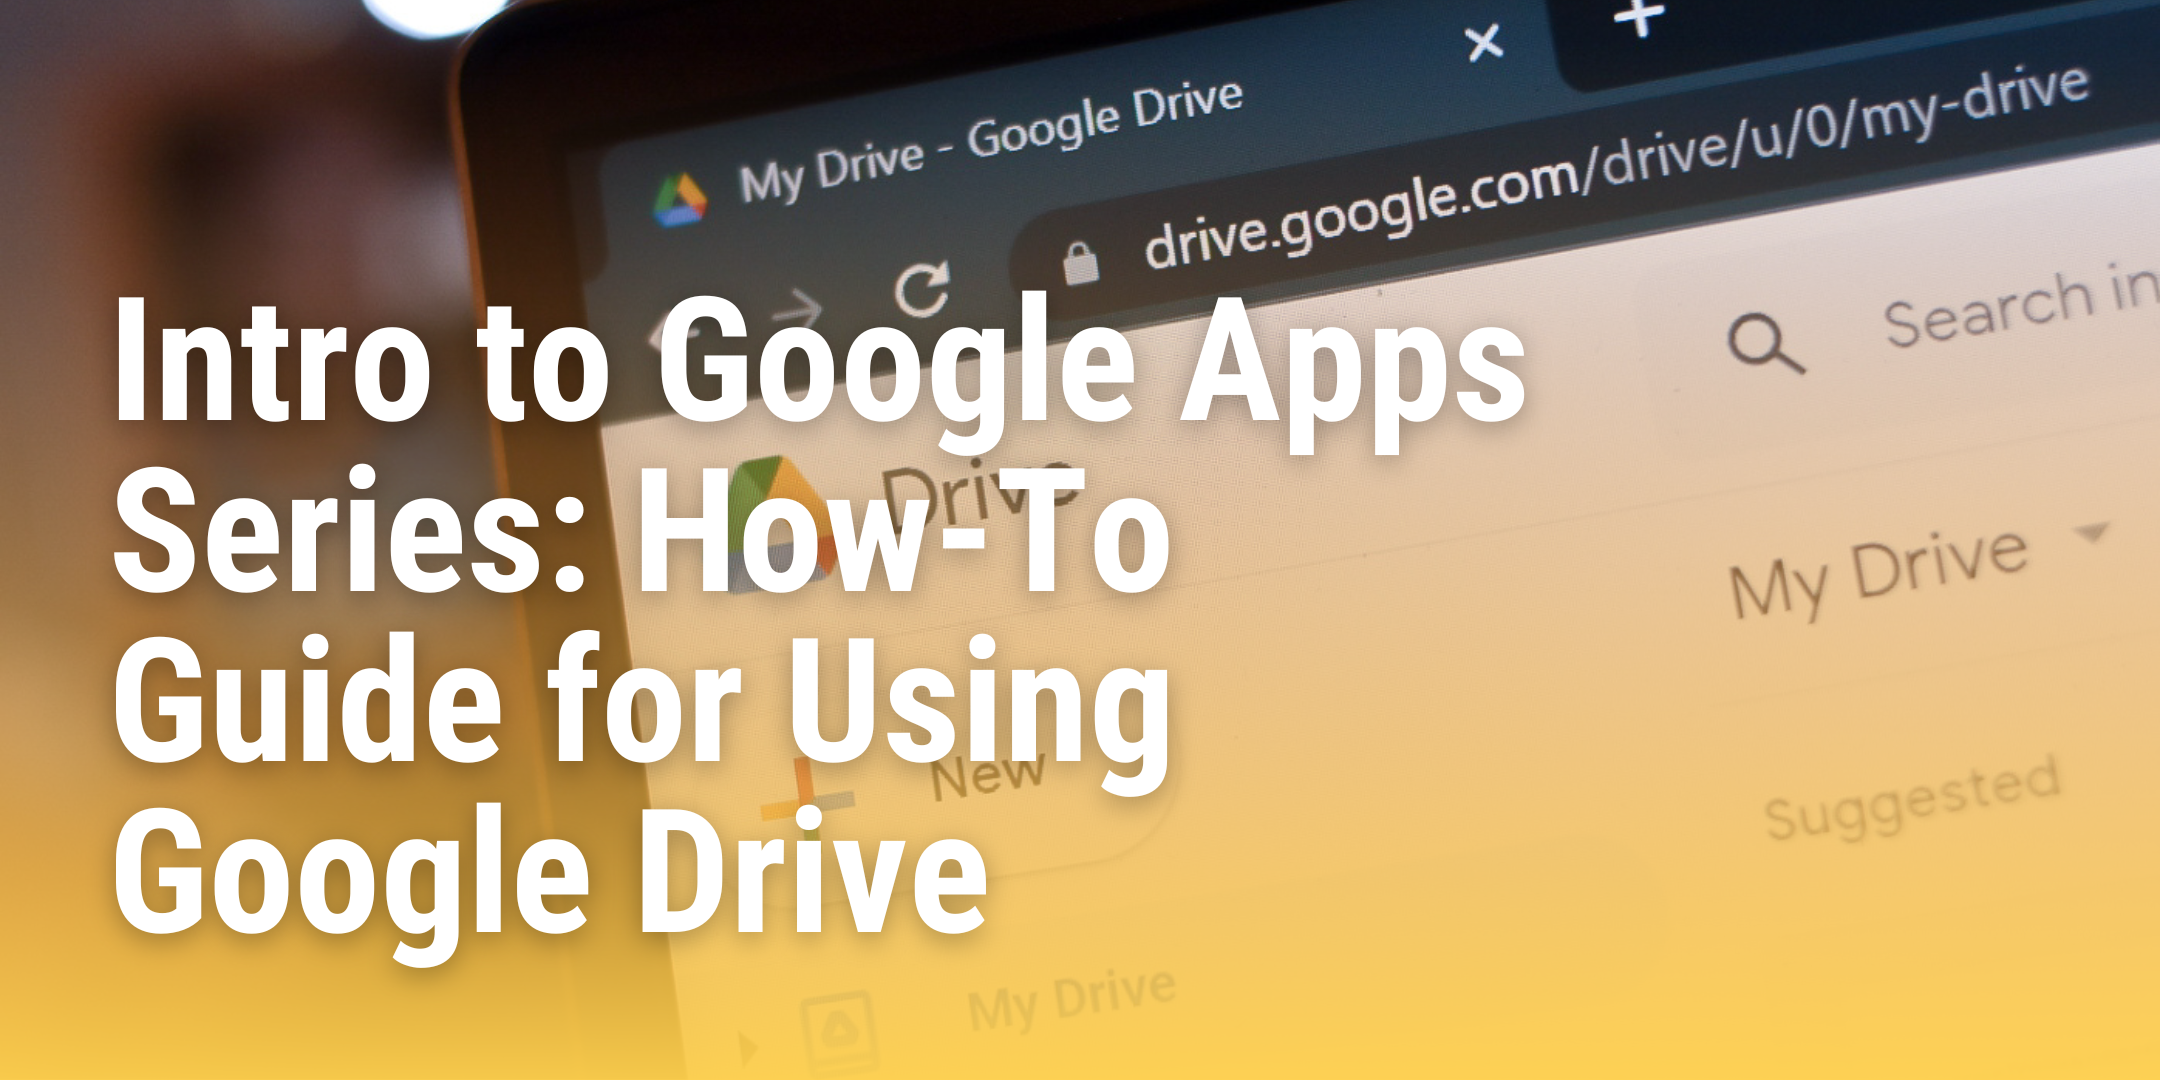 Banner displaying the blog title "Intro to Google Apps: How-To Guide for Using Google Drive".